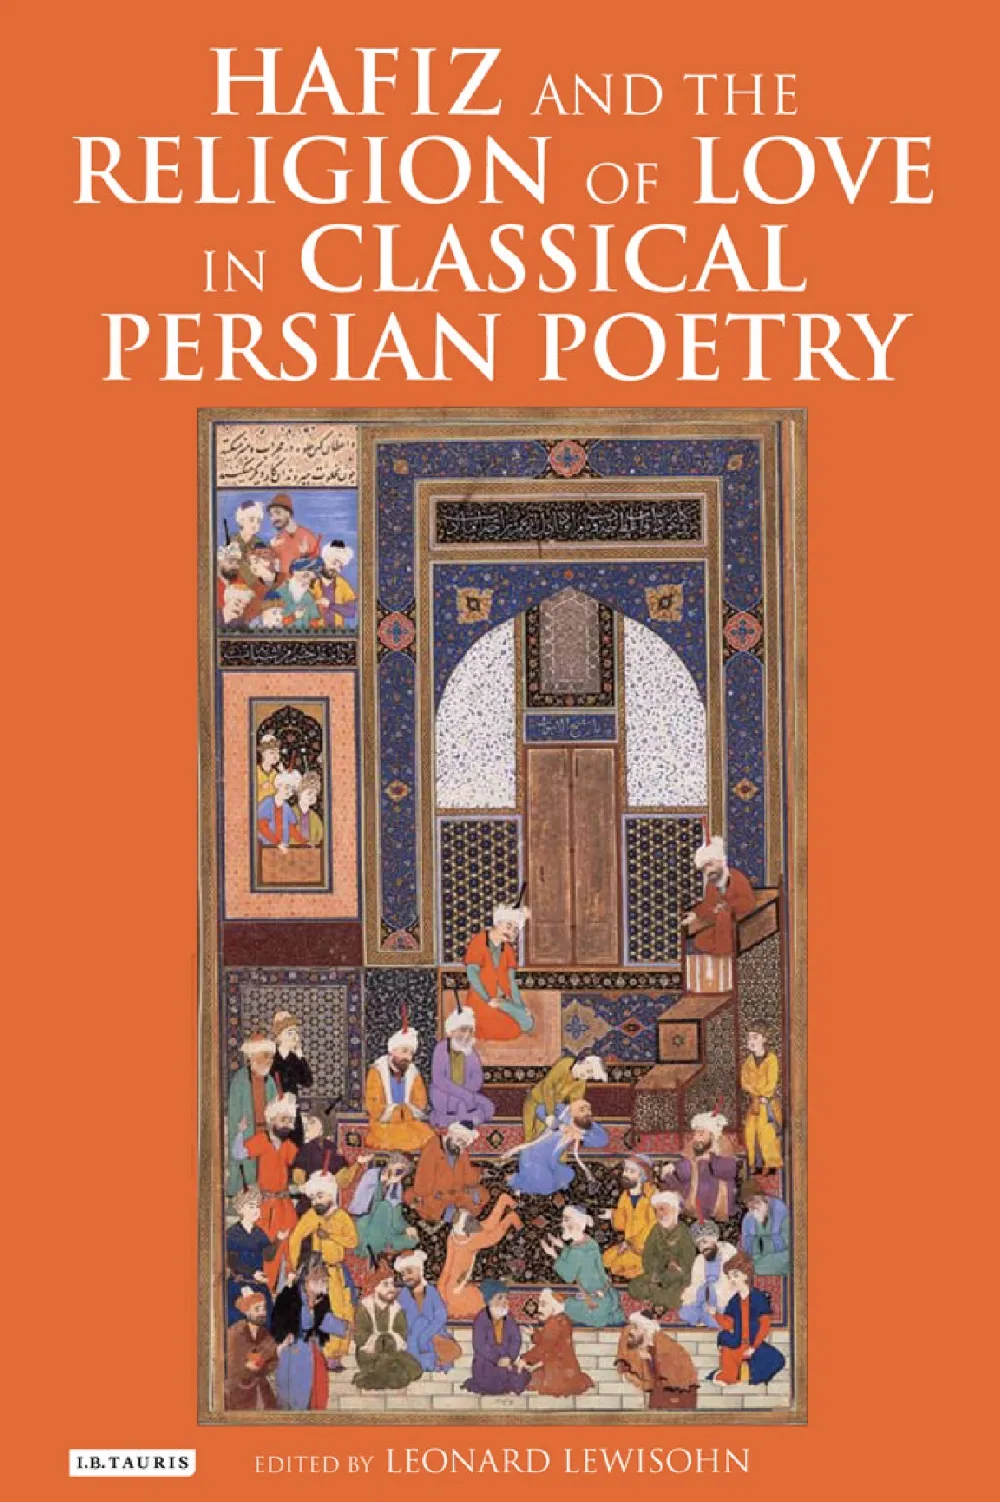 Hafiz and the Religion of Love in Classical Persian Poetry